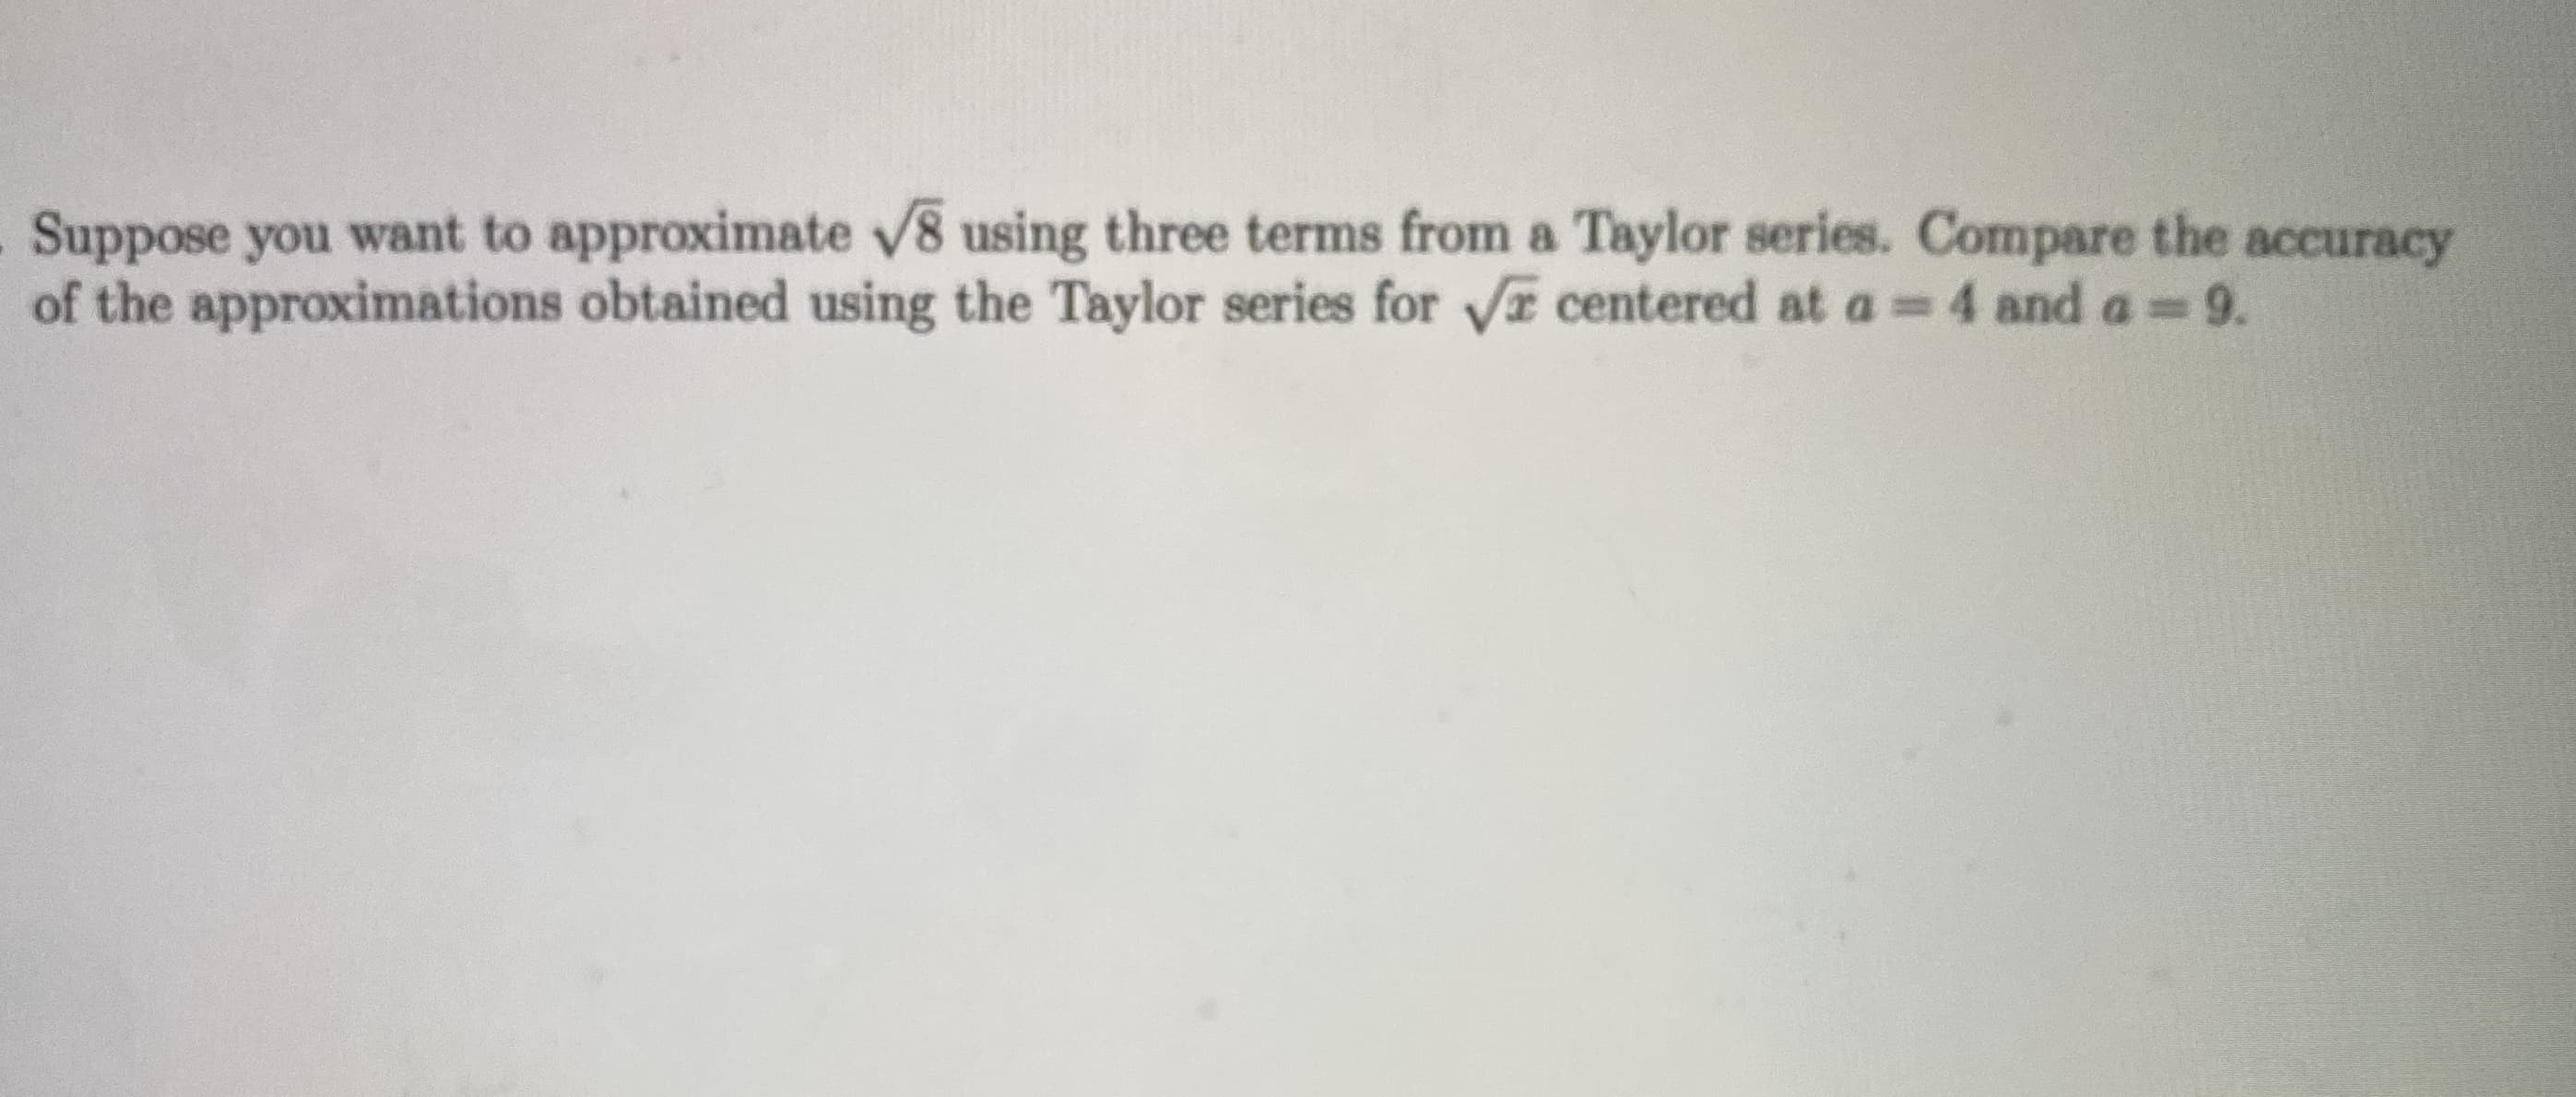 Suppose you want to approximate V8 using three terms from a Taylor series. Compare the accuracy
of the approximations obtained using the Taylor series for Vr centered at a=4 and a 9.
